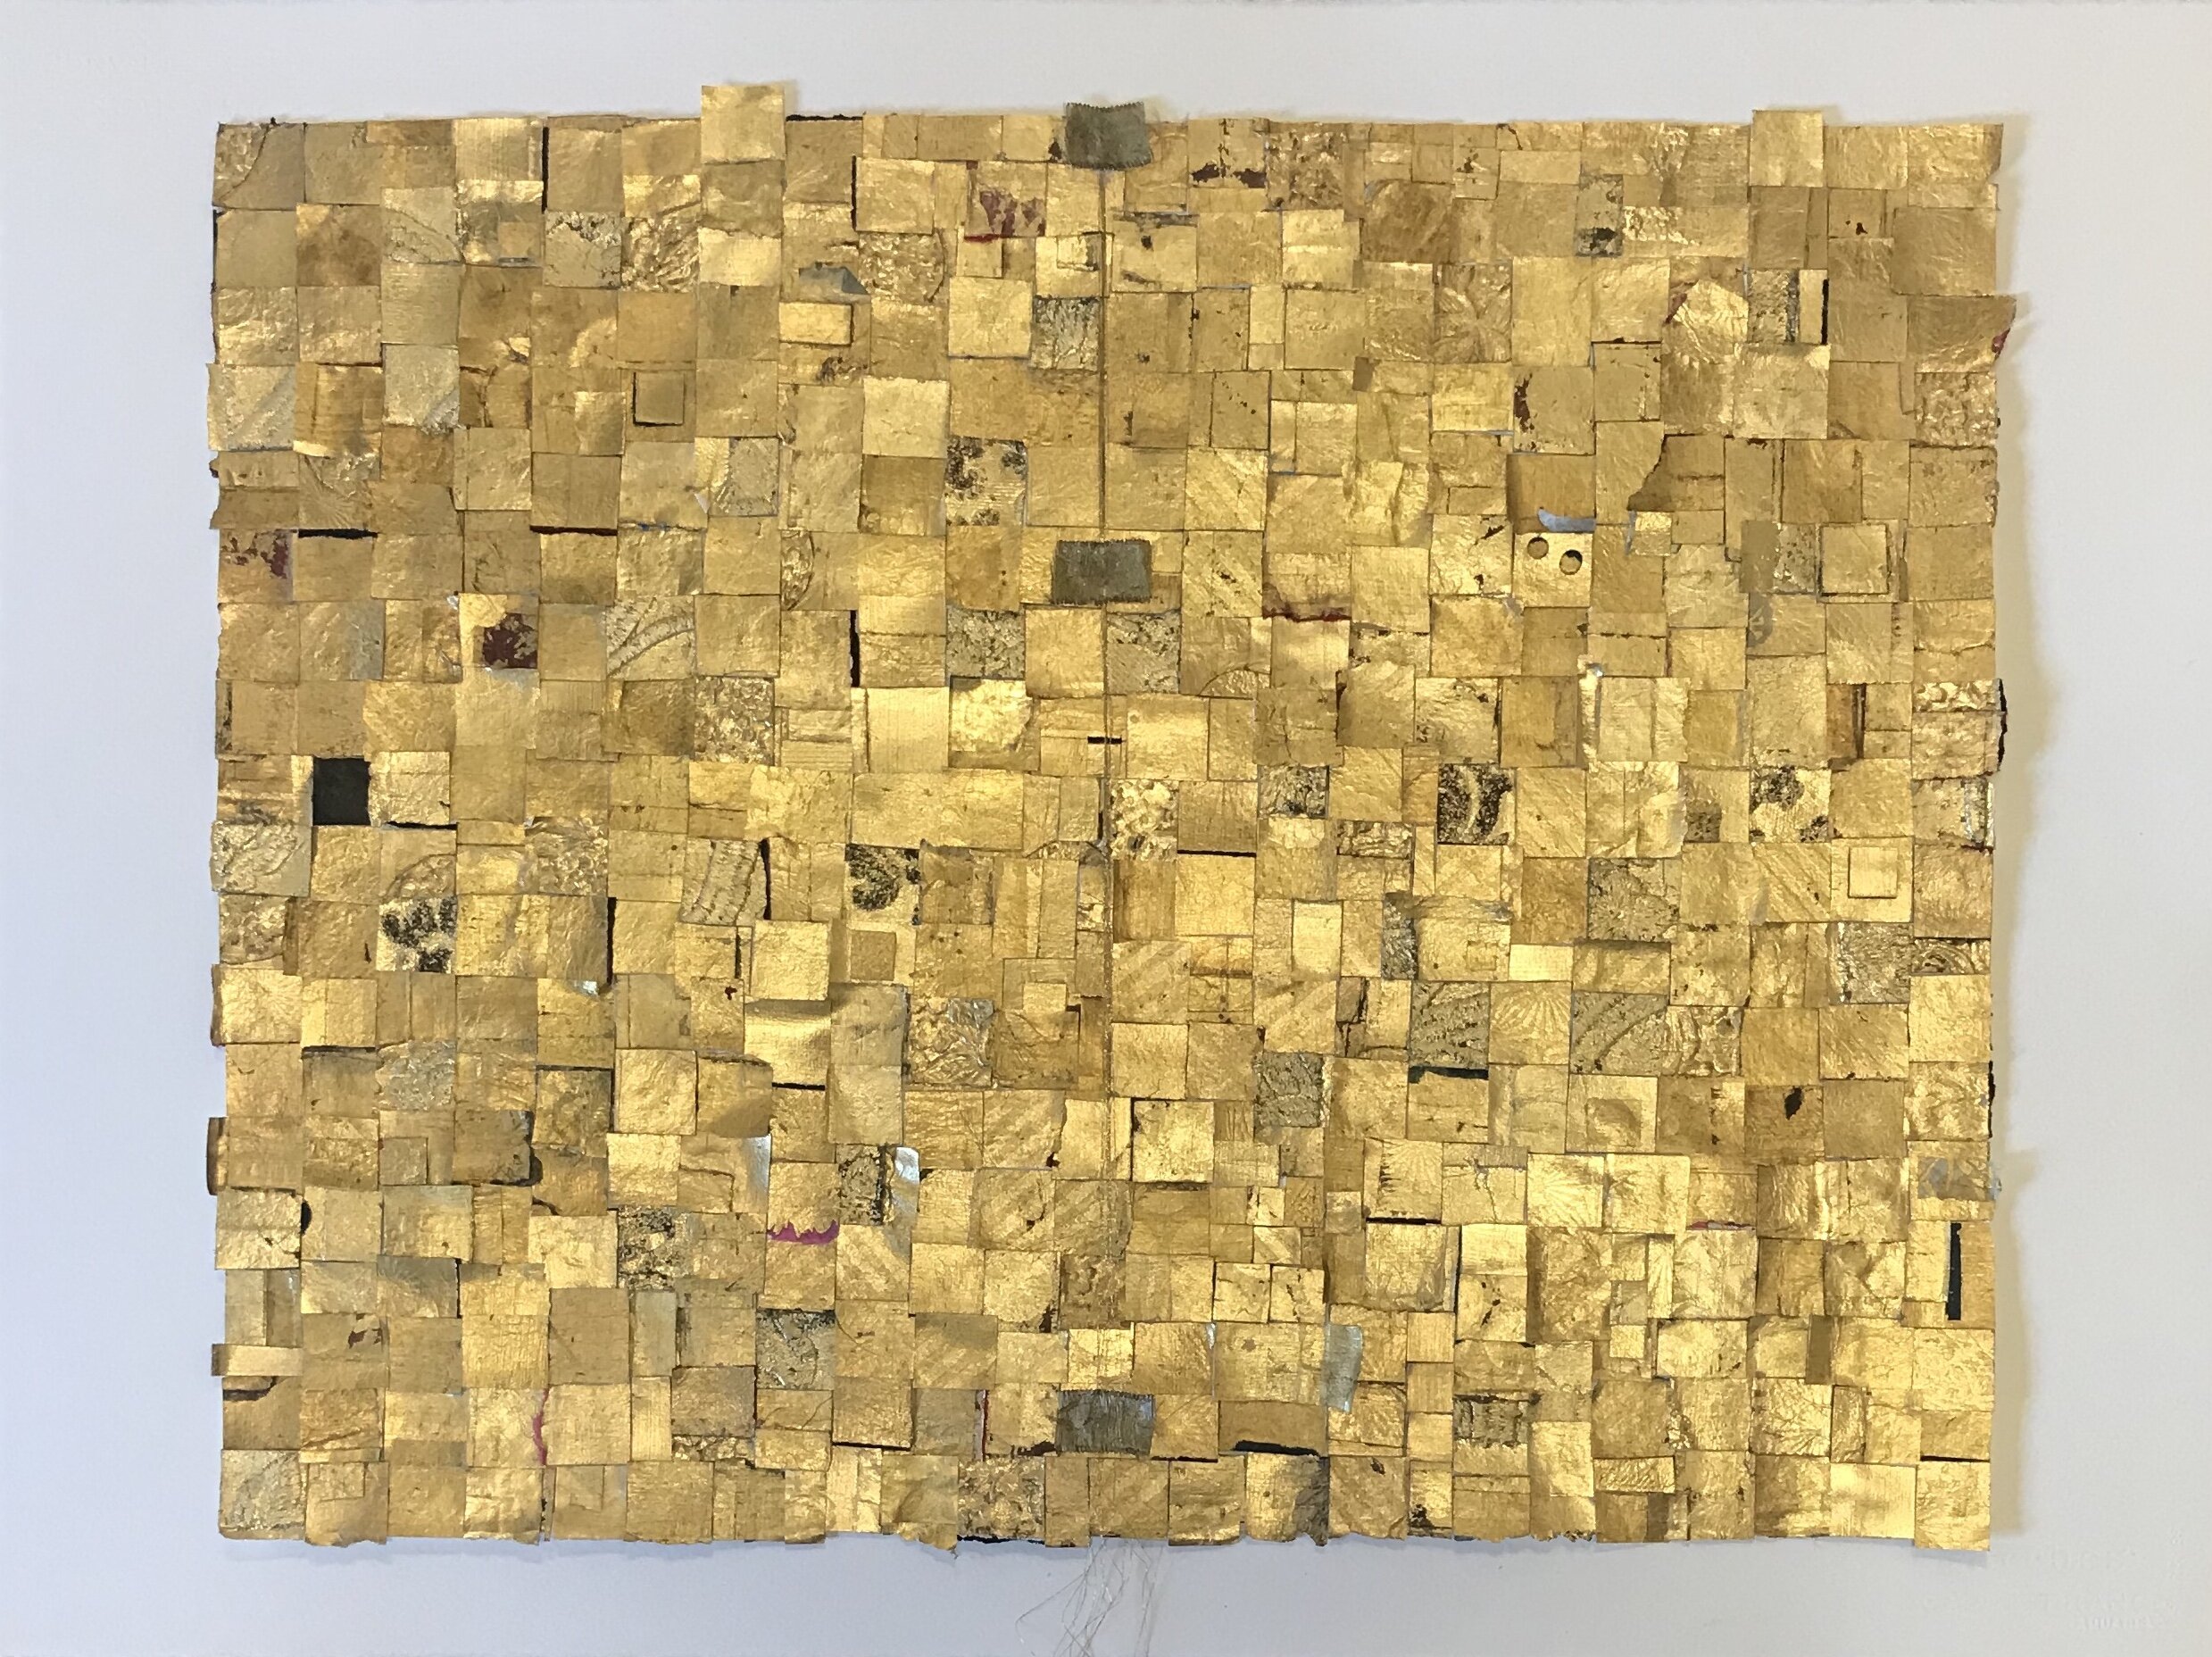  Donna Mintz   Untitled (gold pages),   2020 Collage of found and personal papers, antique French ribbon, 23K gold thread, and composition gold leaf on Arches paper 22.5 x 30 in. YIMBY price $2,000   SOLD  